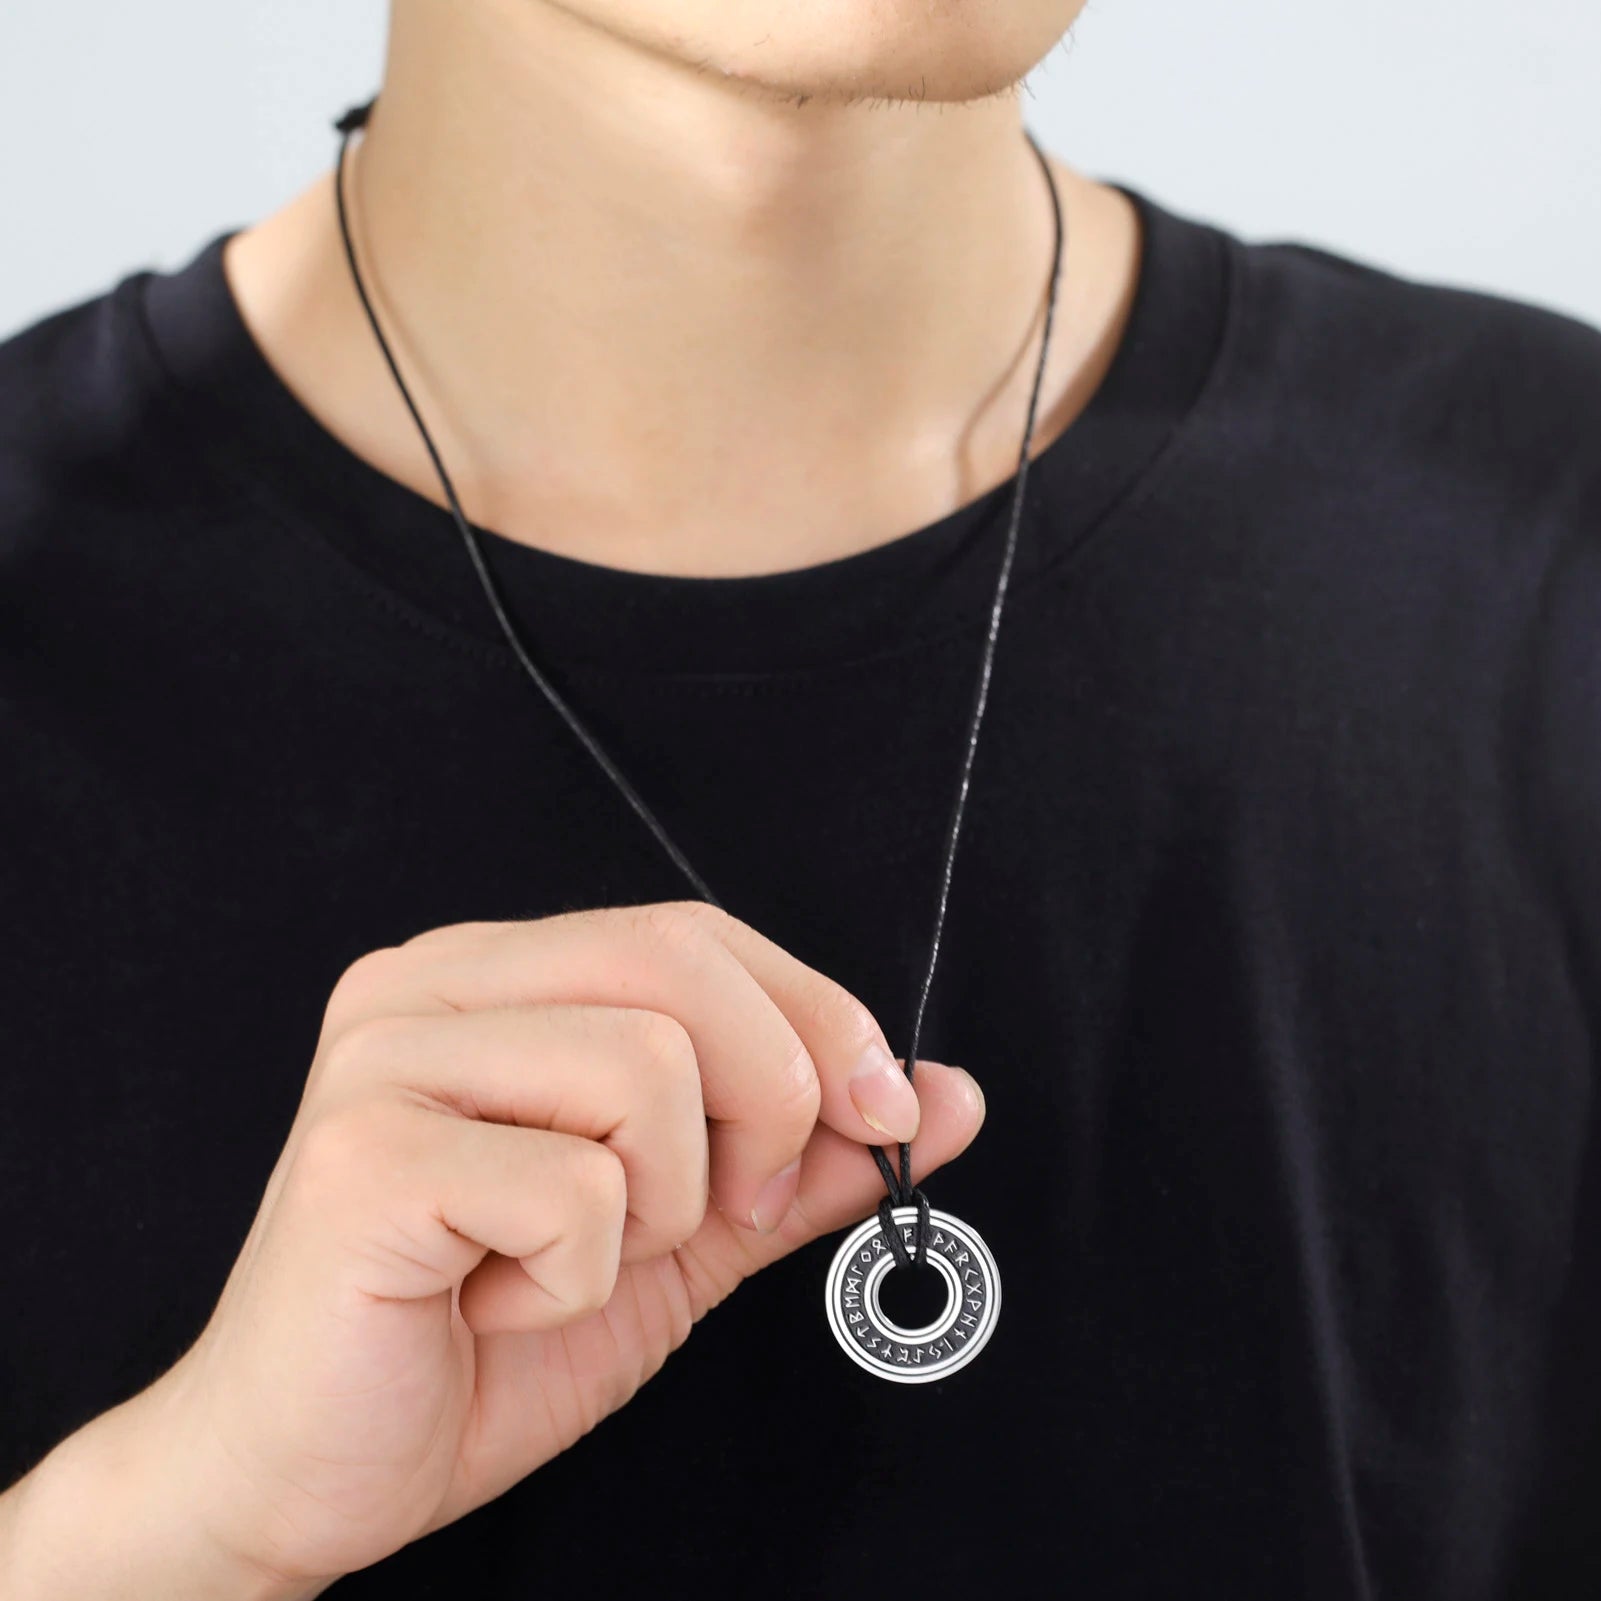 Norse Rune Necklace - Vintage Stainless Steel Pendant for Men Men's Necklace